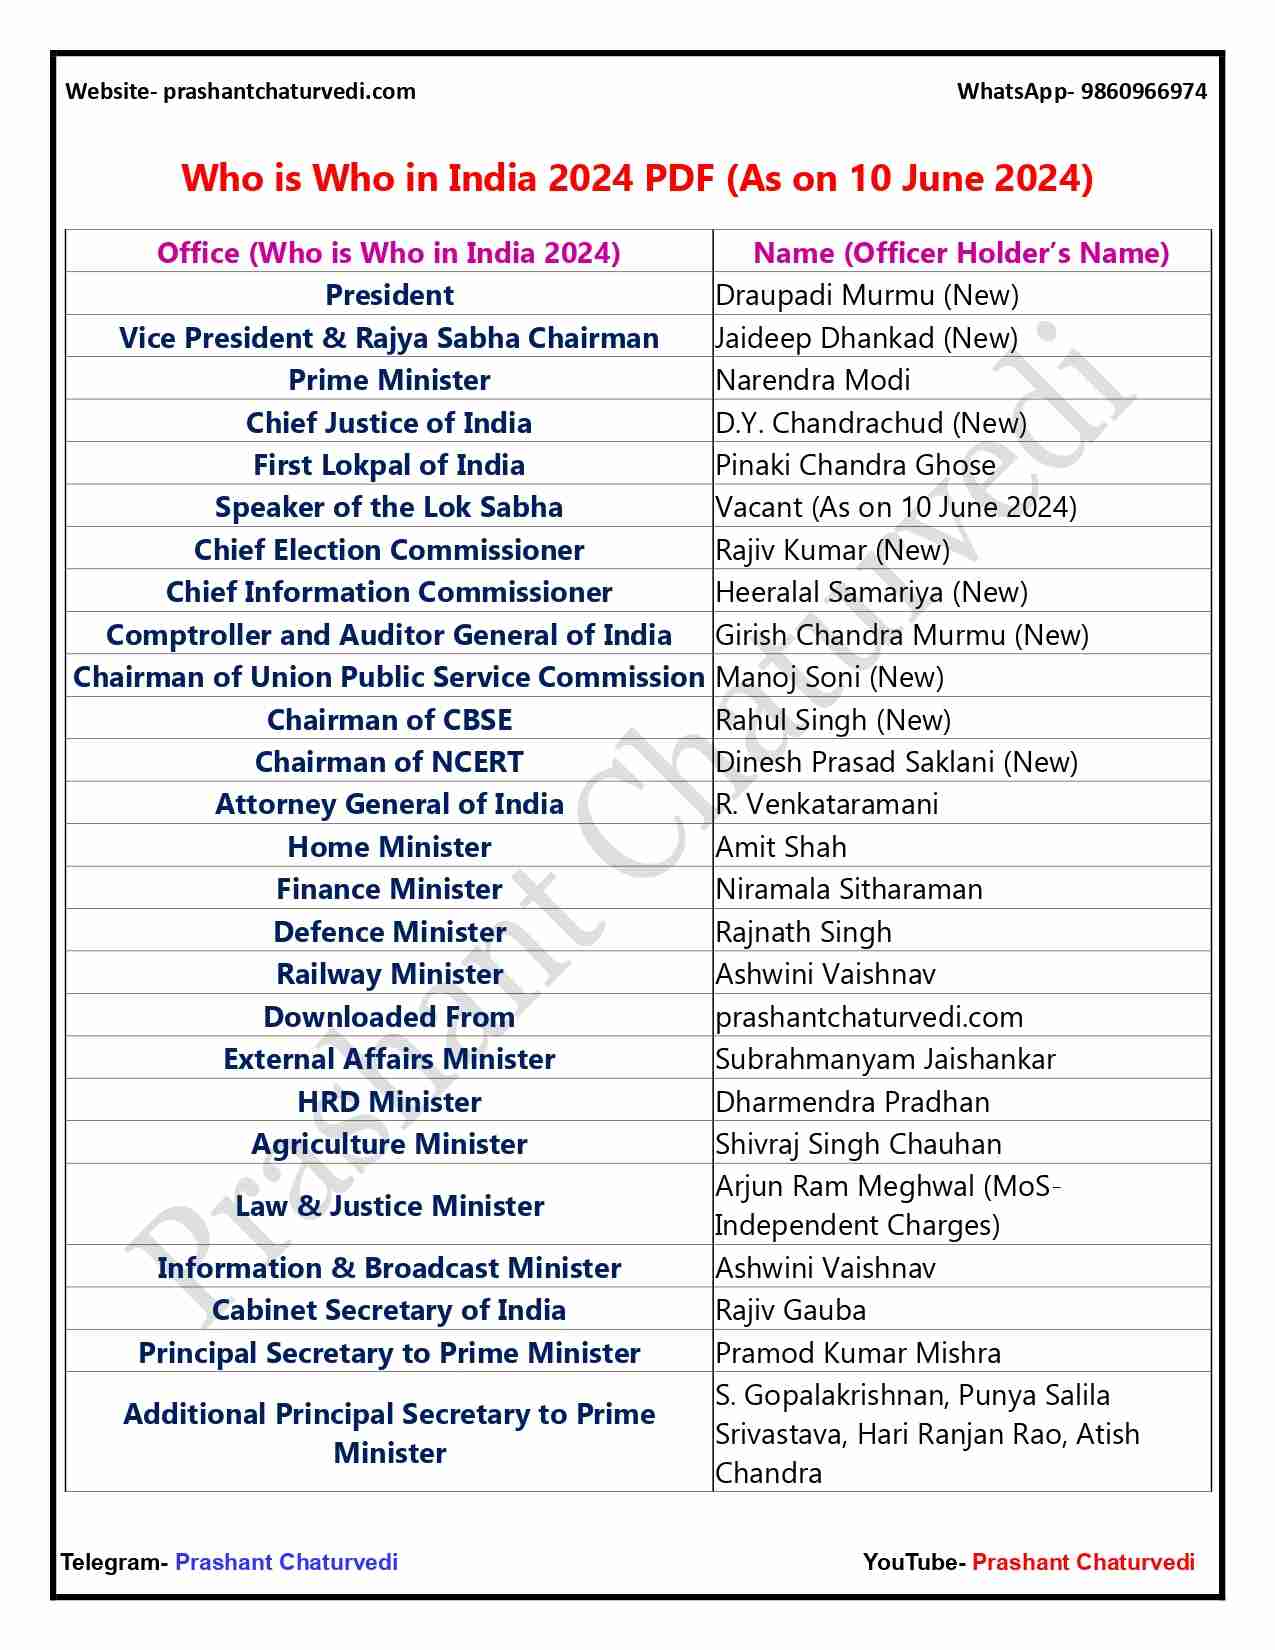 Who is Who in India 2024 (important office holders in india)-1-compressed